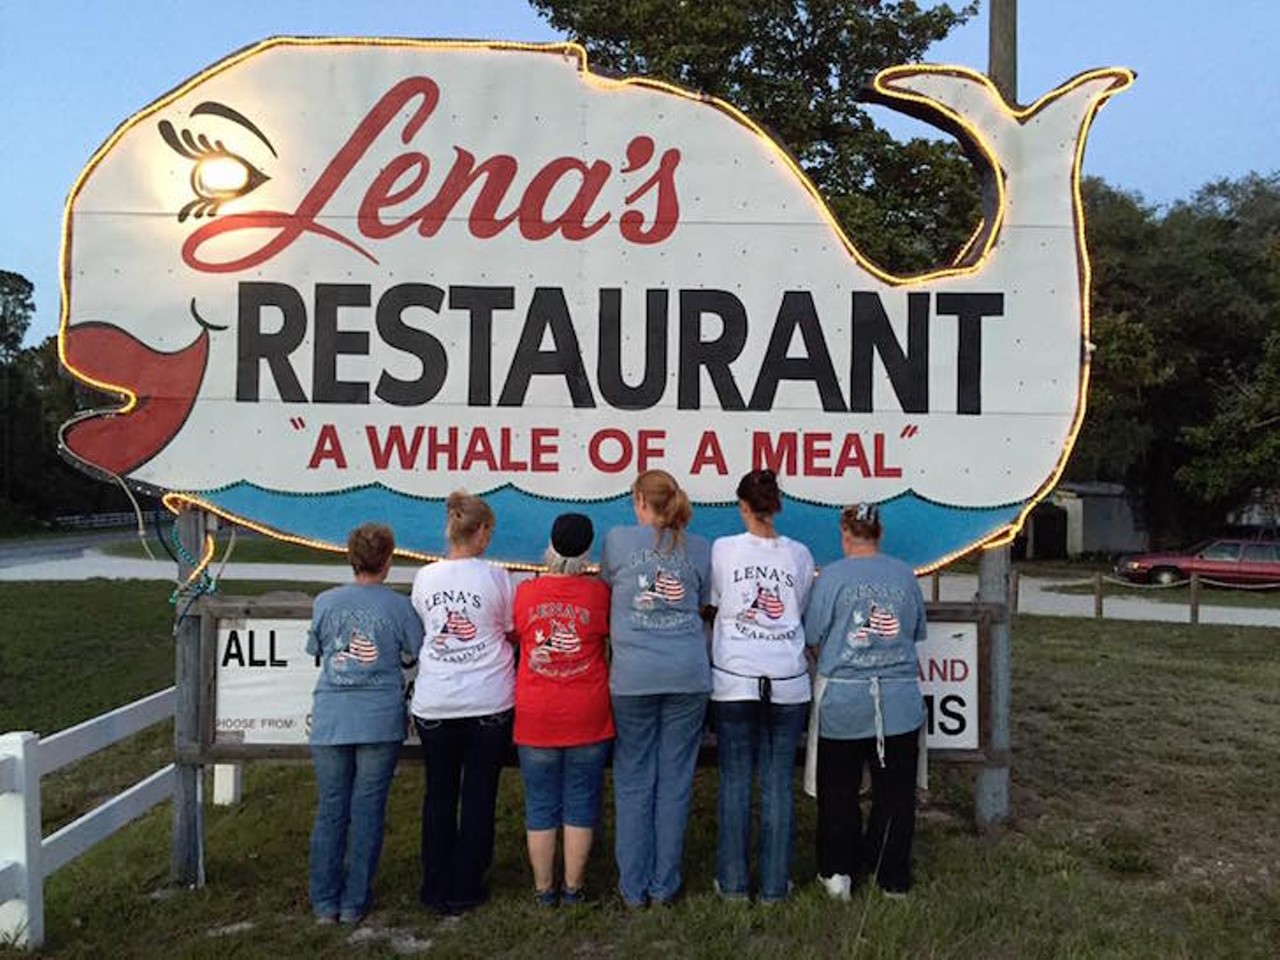 Lena's Seafood
18478 E. Highway 40, Silver Springs, 352-625-6489
Lena's in Silver Springs keeps it simple and classic &#150; fried seafood (and lots of it) is the focus &#150; and it's kept people coming back for decades.
Photo via Lena&#146;s Seafood/FB